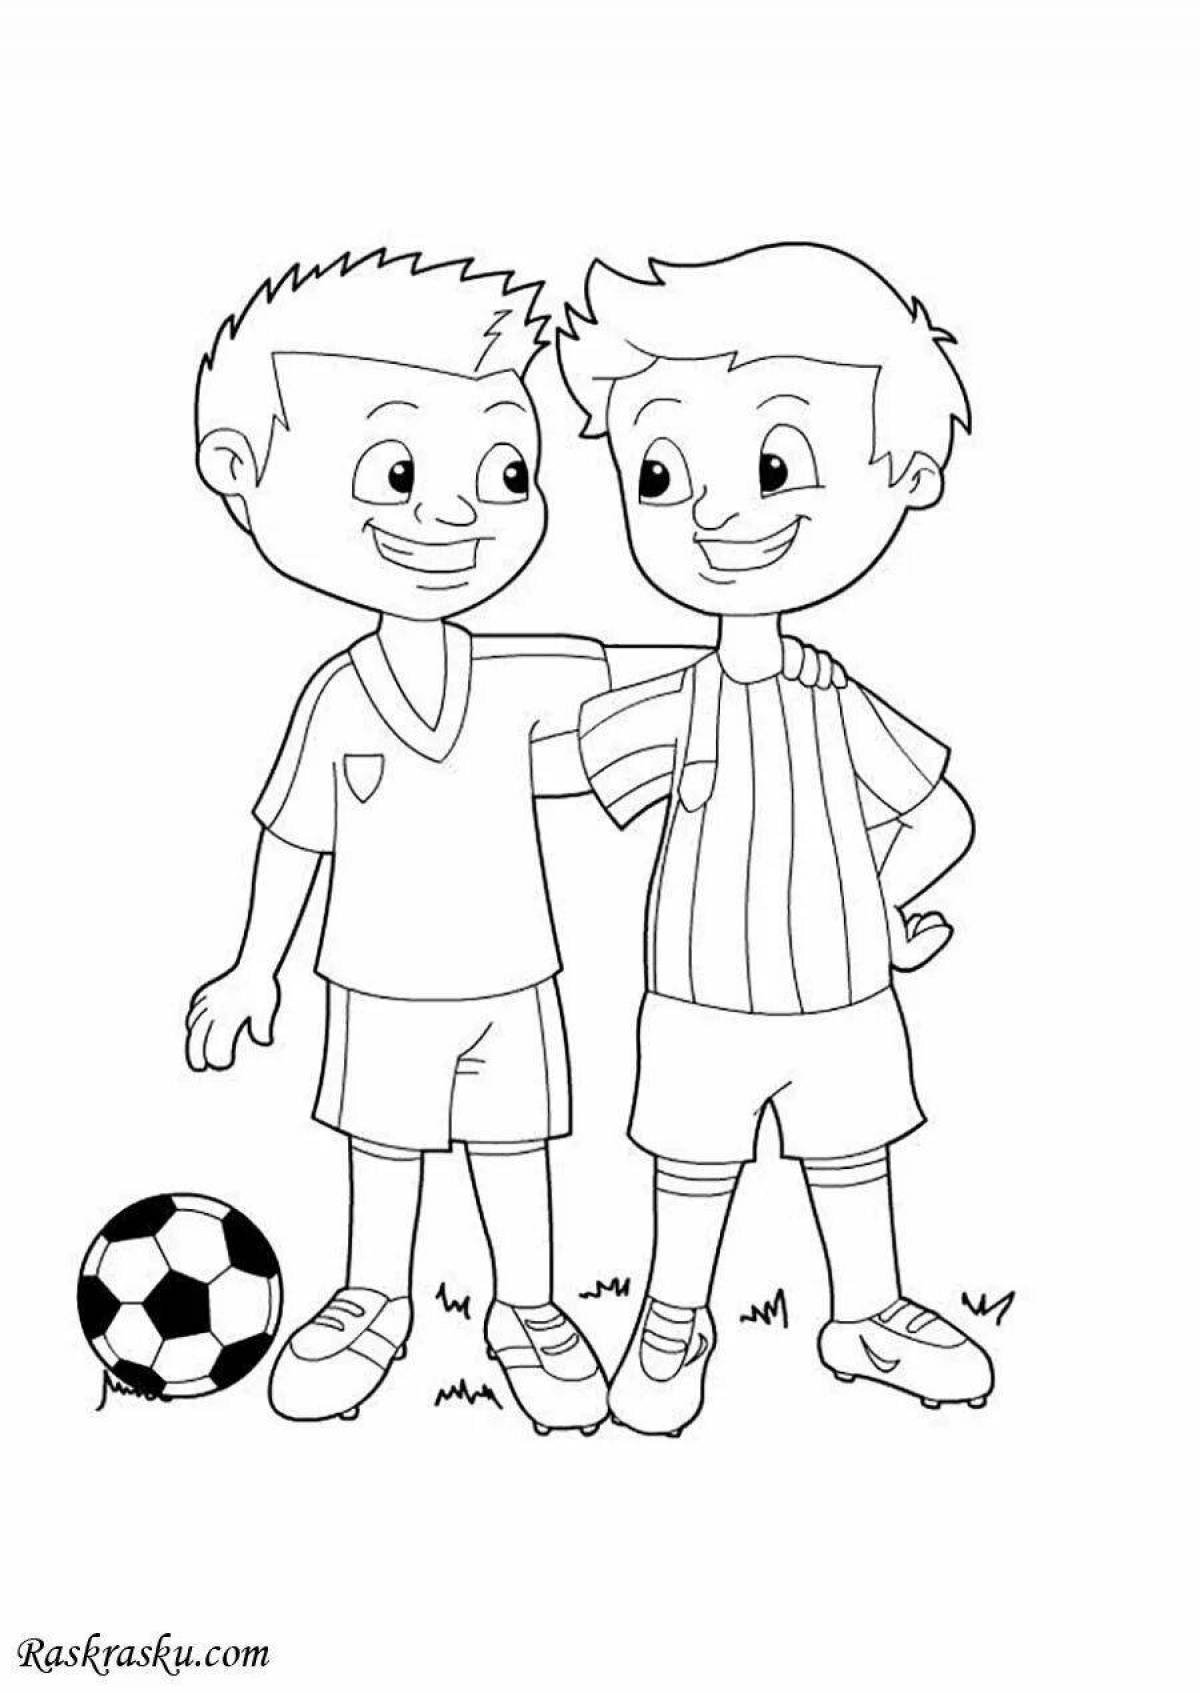 Coloring page glamorous football team